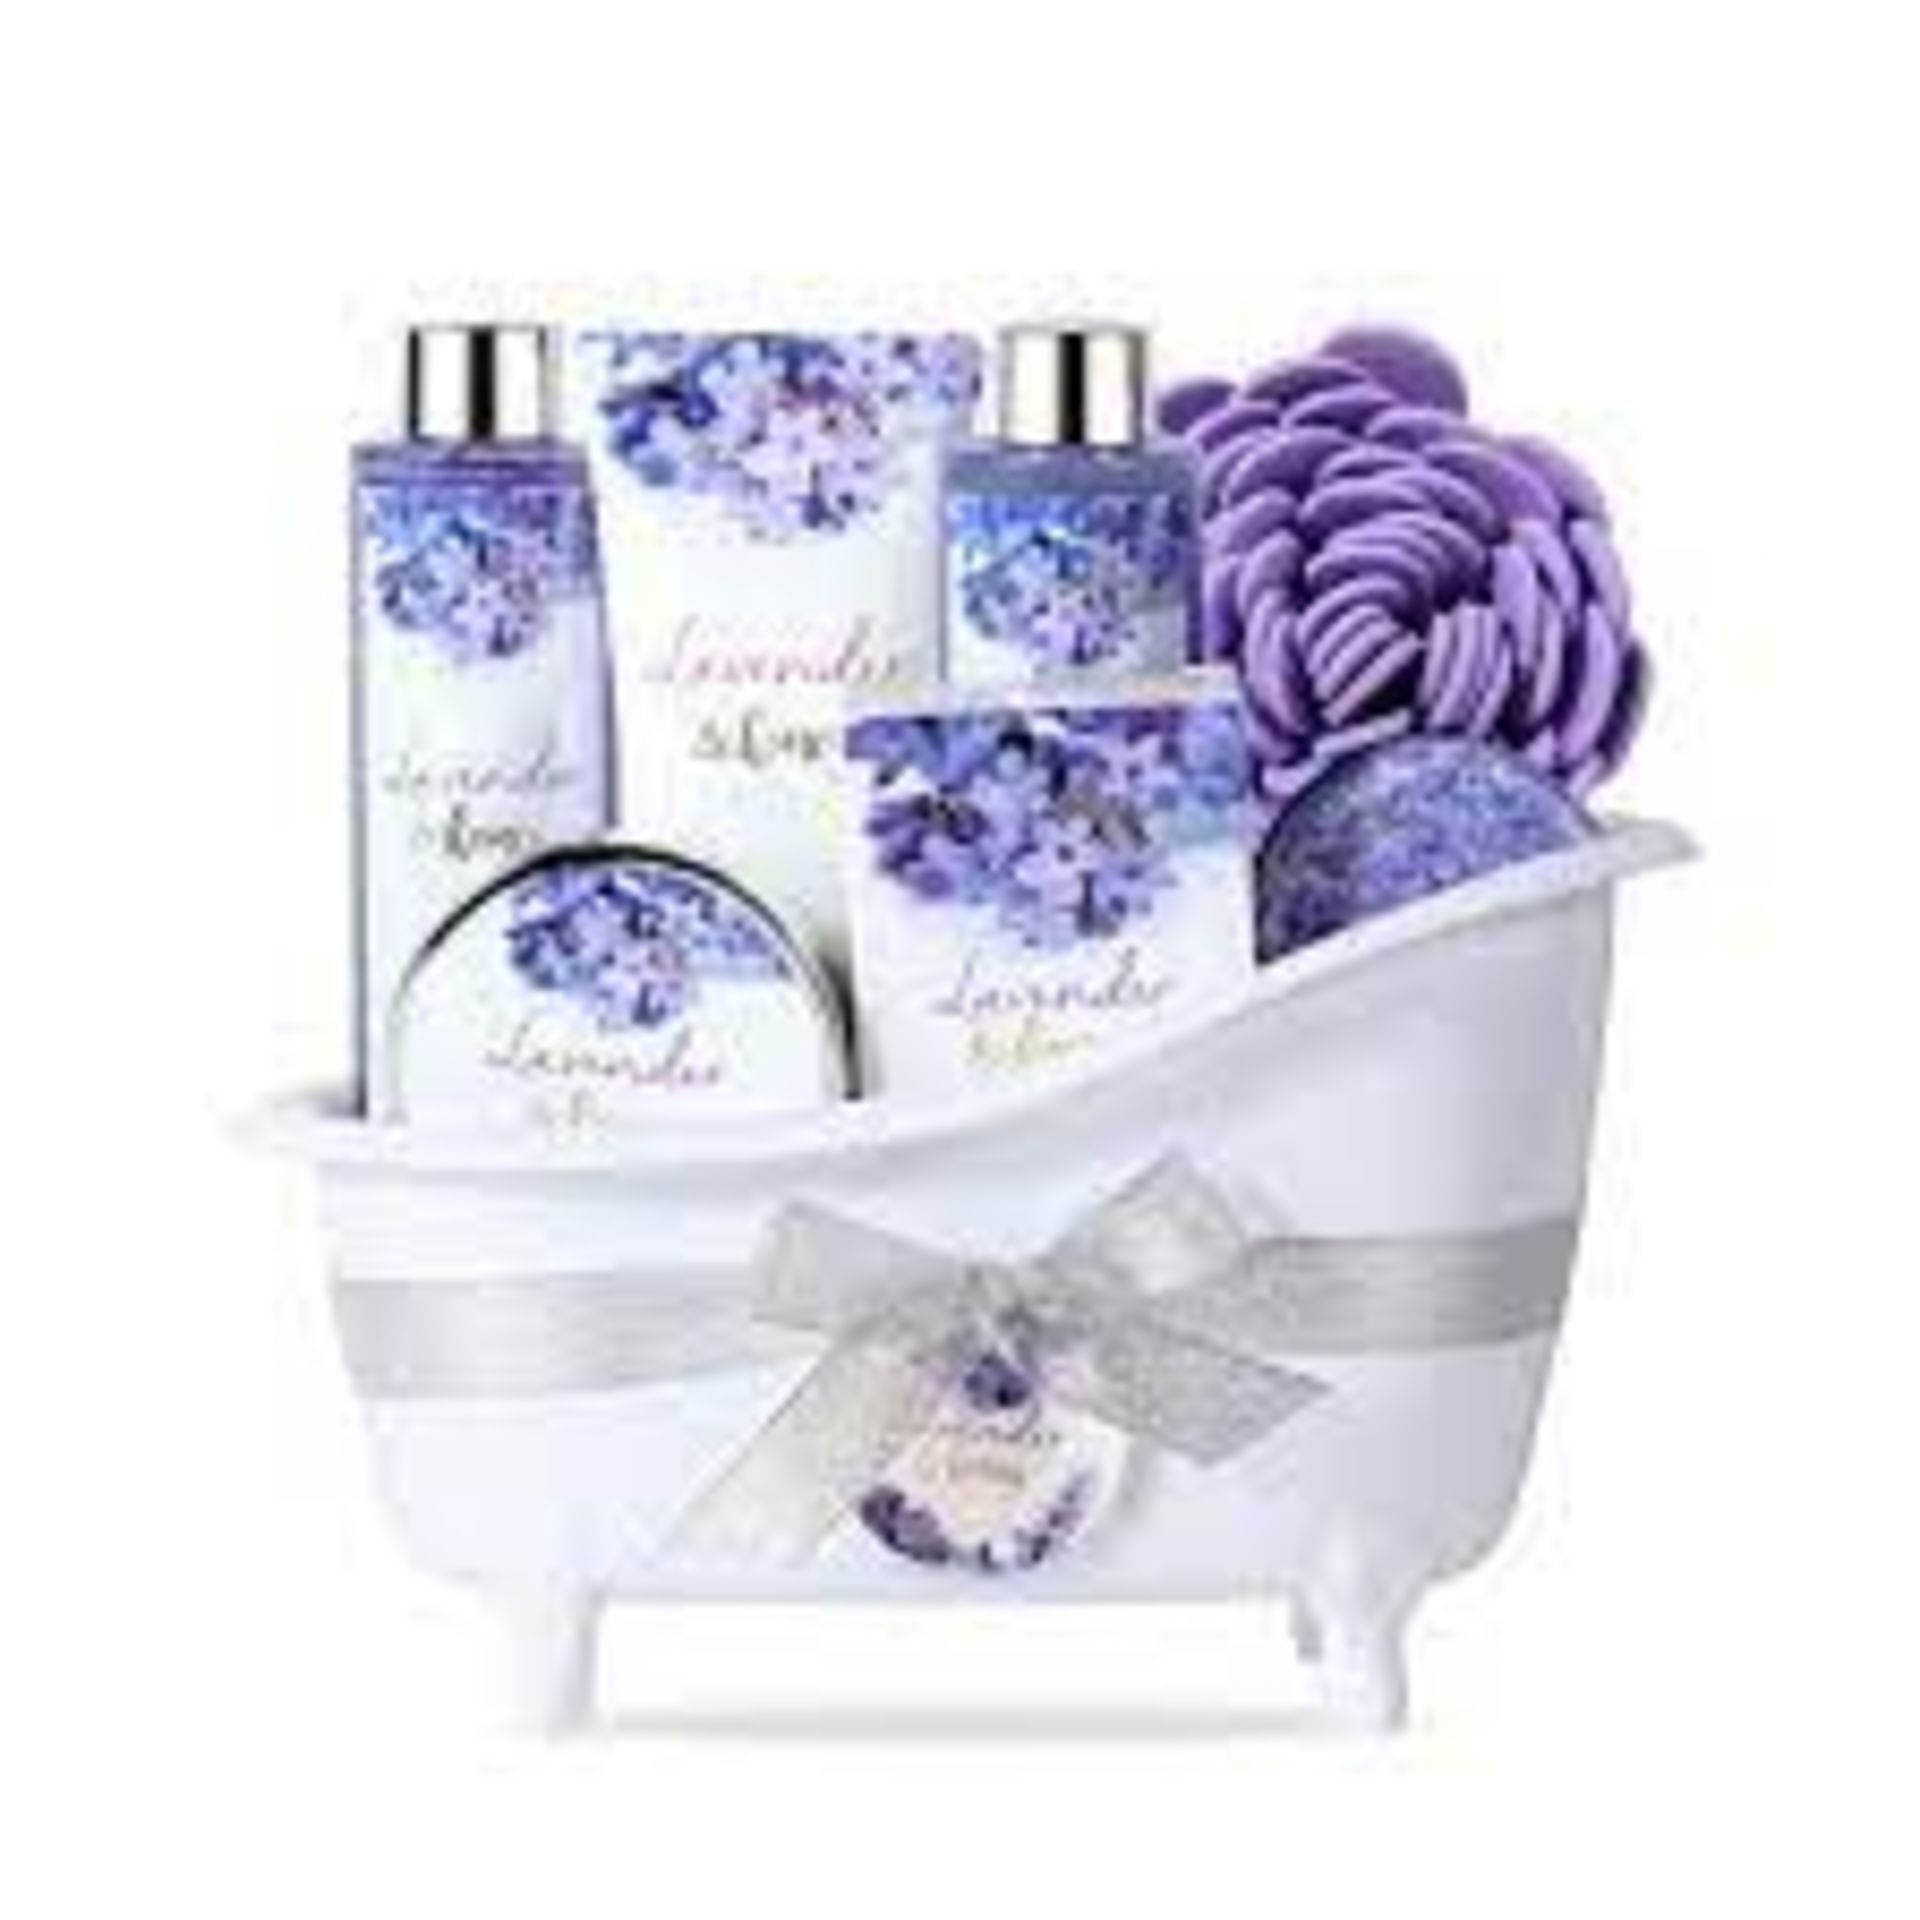 PALLET TO CONTAIN 48 X NEW PACKAGED BODY & EARTH Lavender & Honey Spa Bathtub Set. (ROW12) Contents: